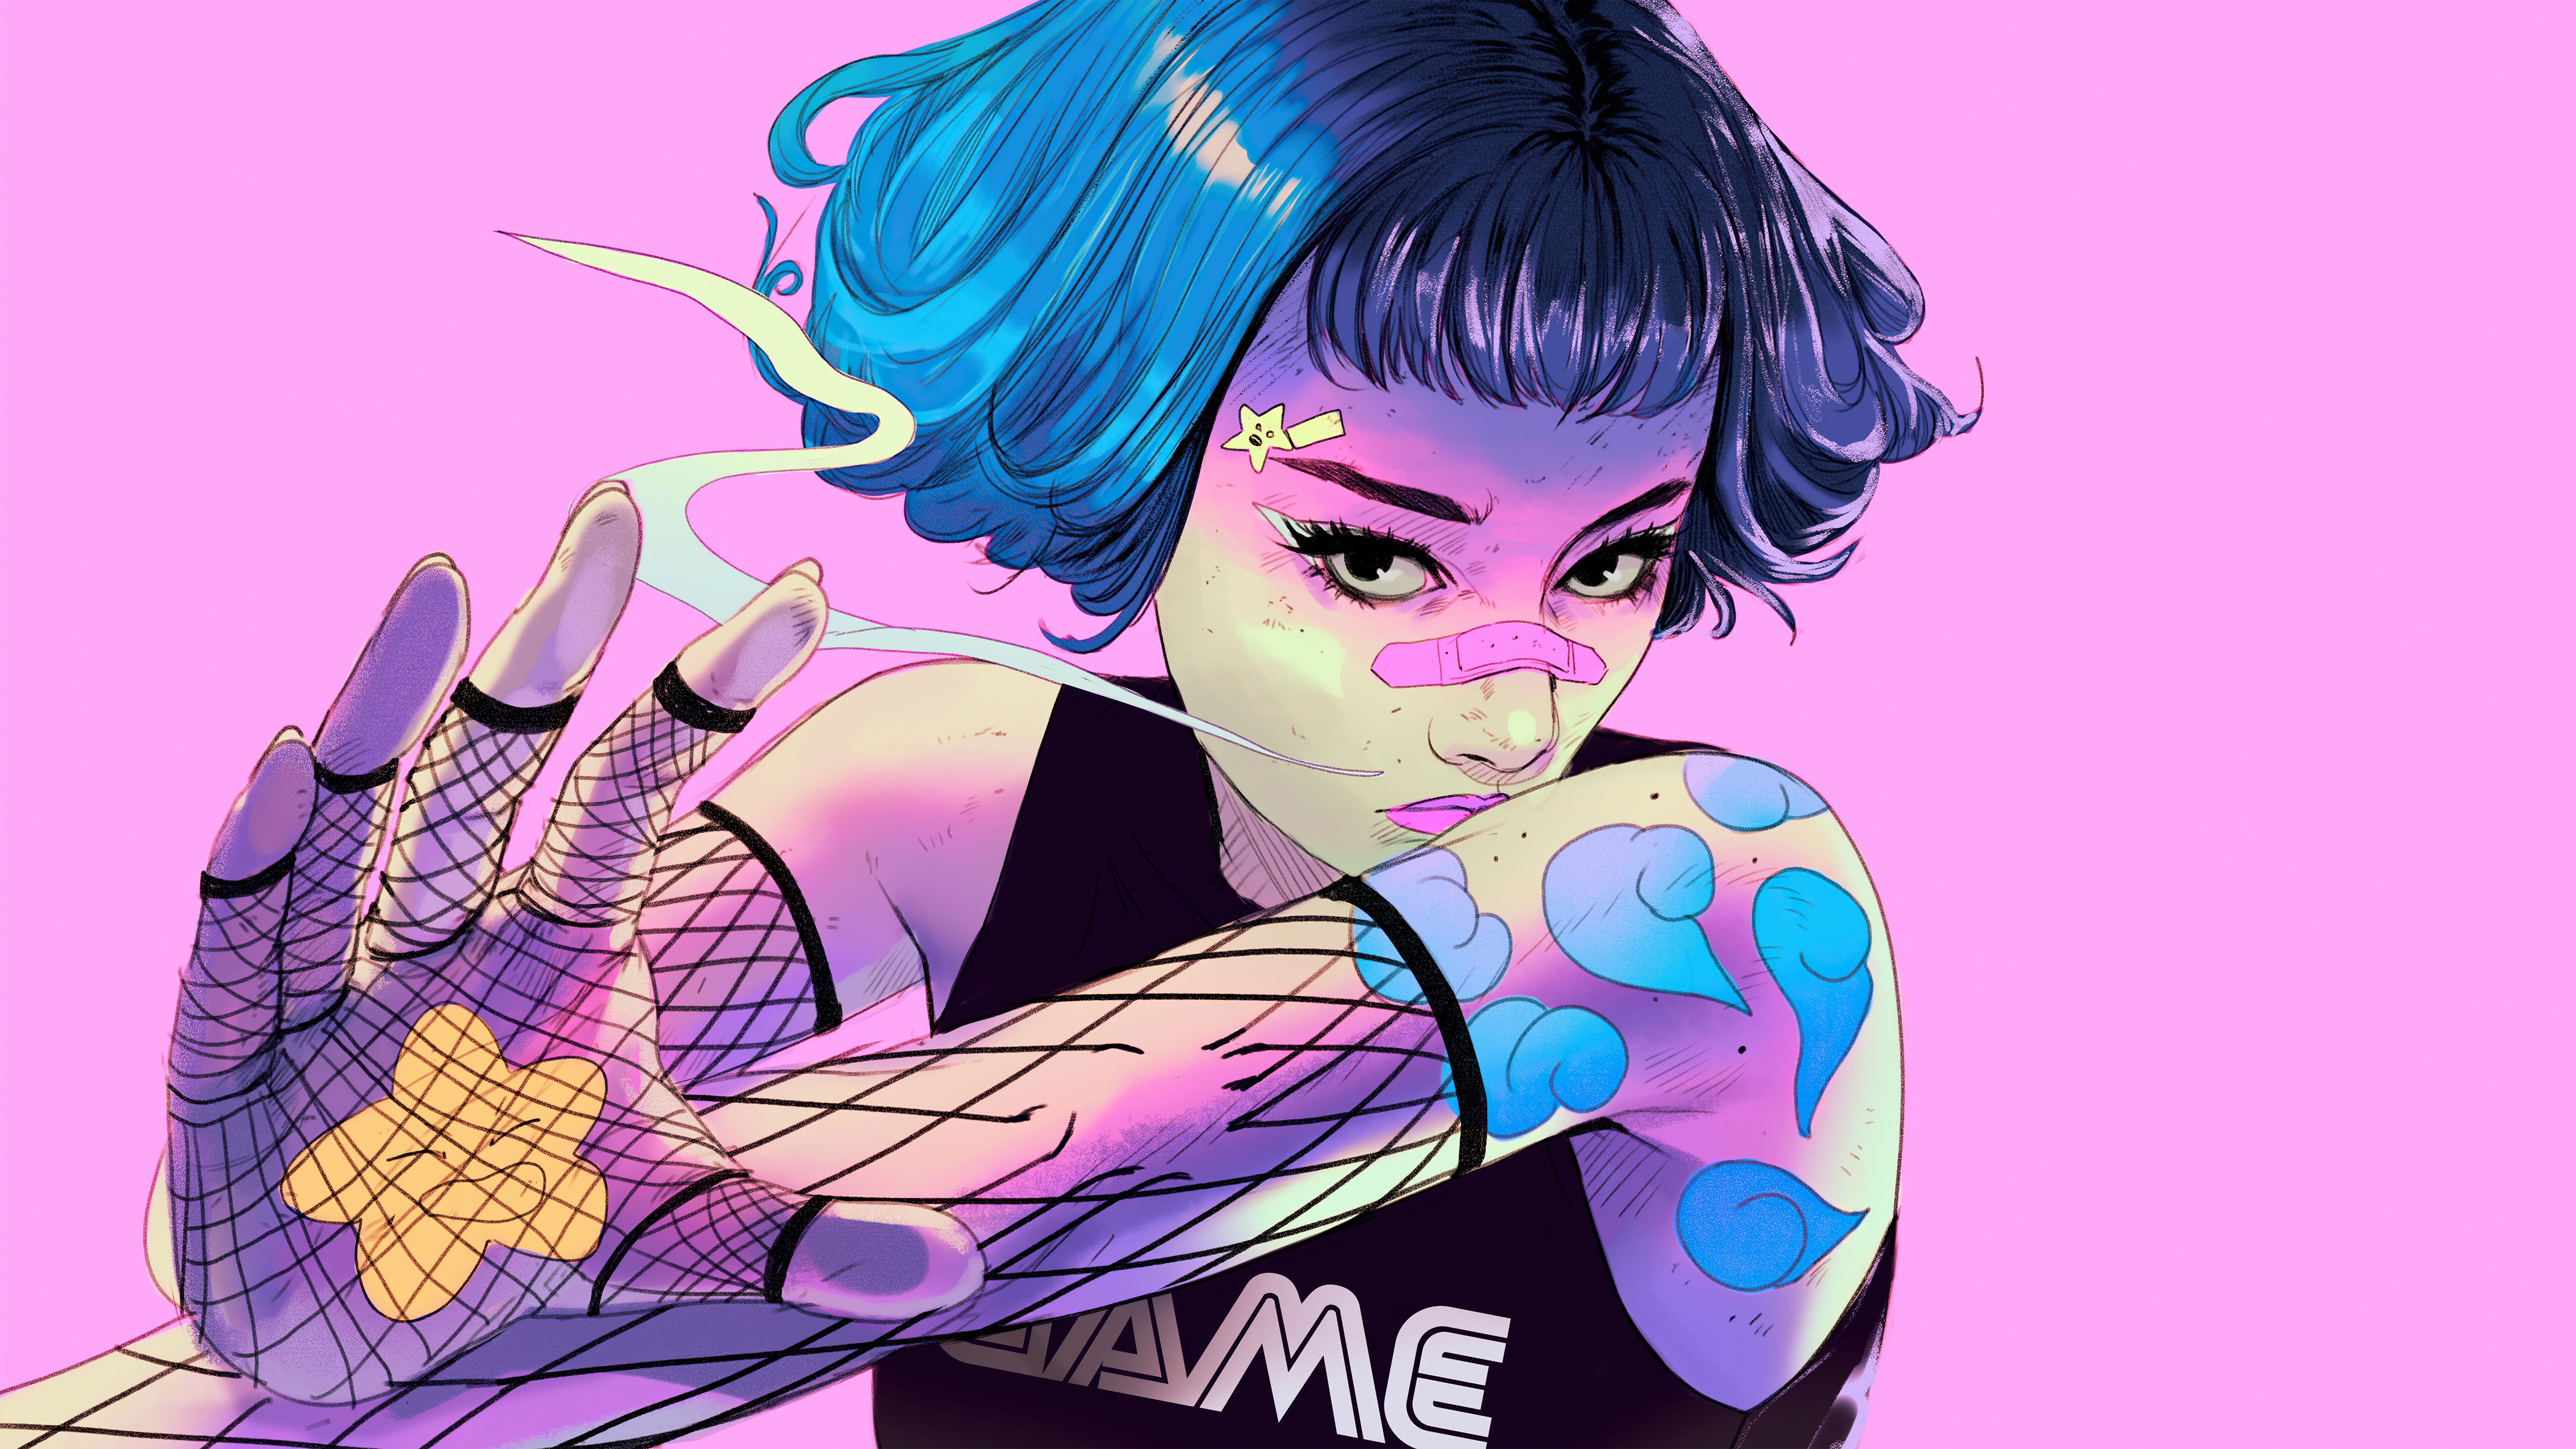 A digital illustration of a blue-haired woman with tattoos, holding a ball of blue light in her hand. - Cyberpunk